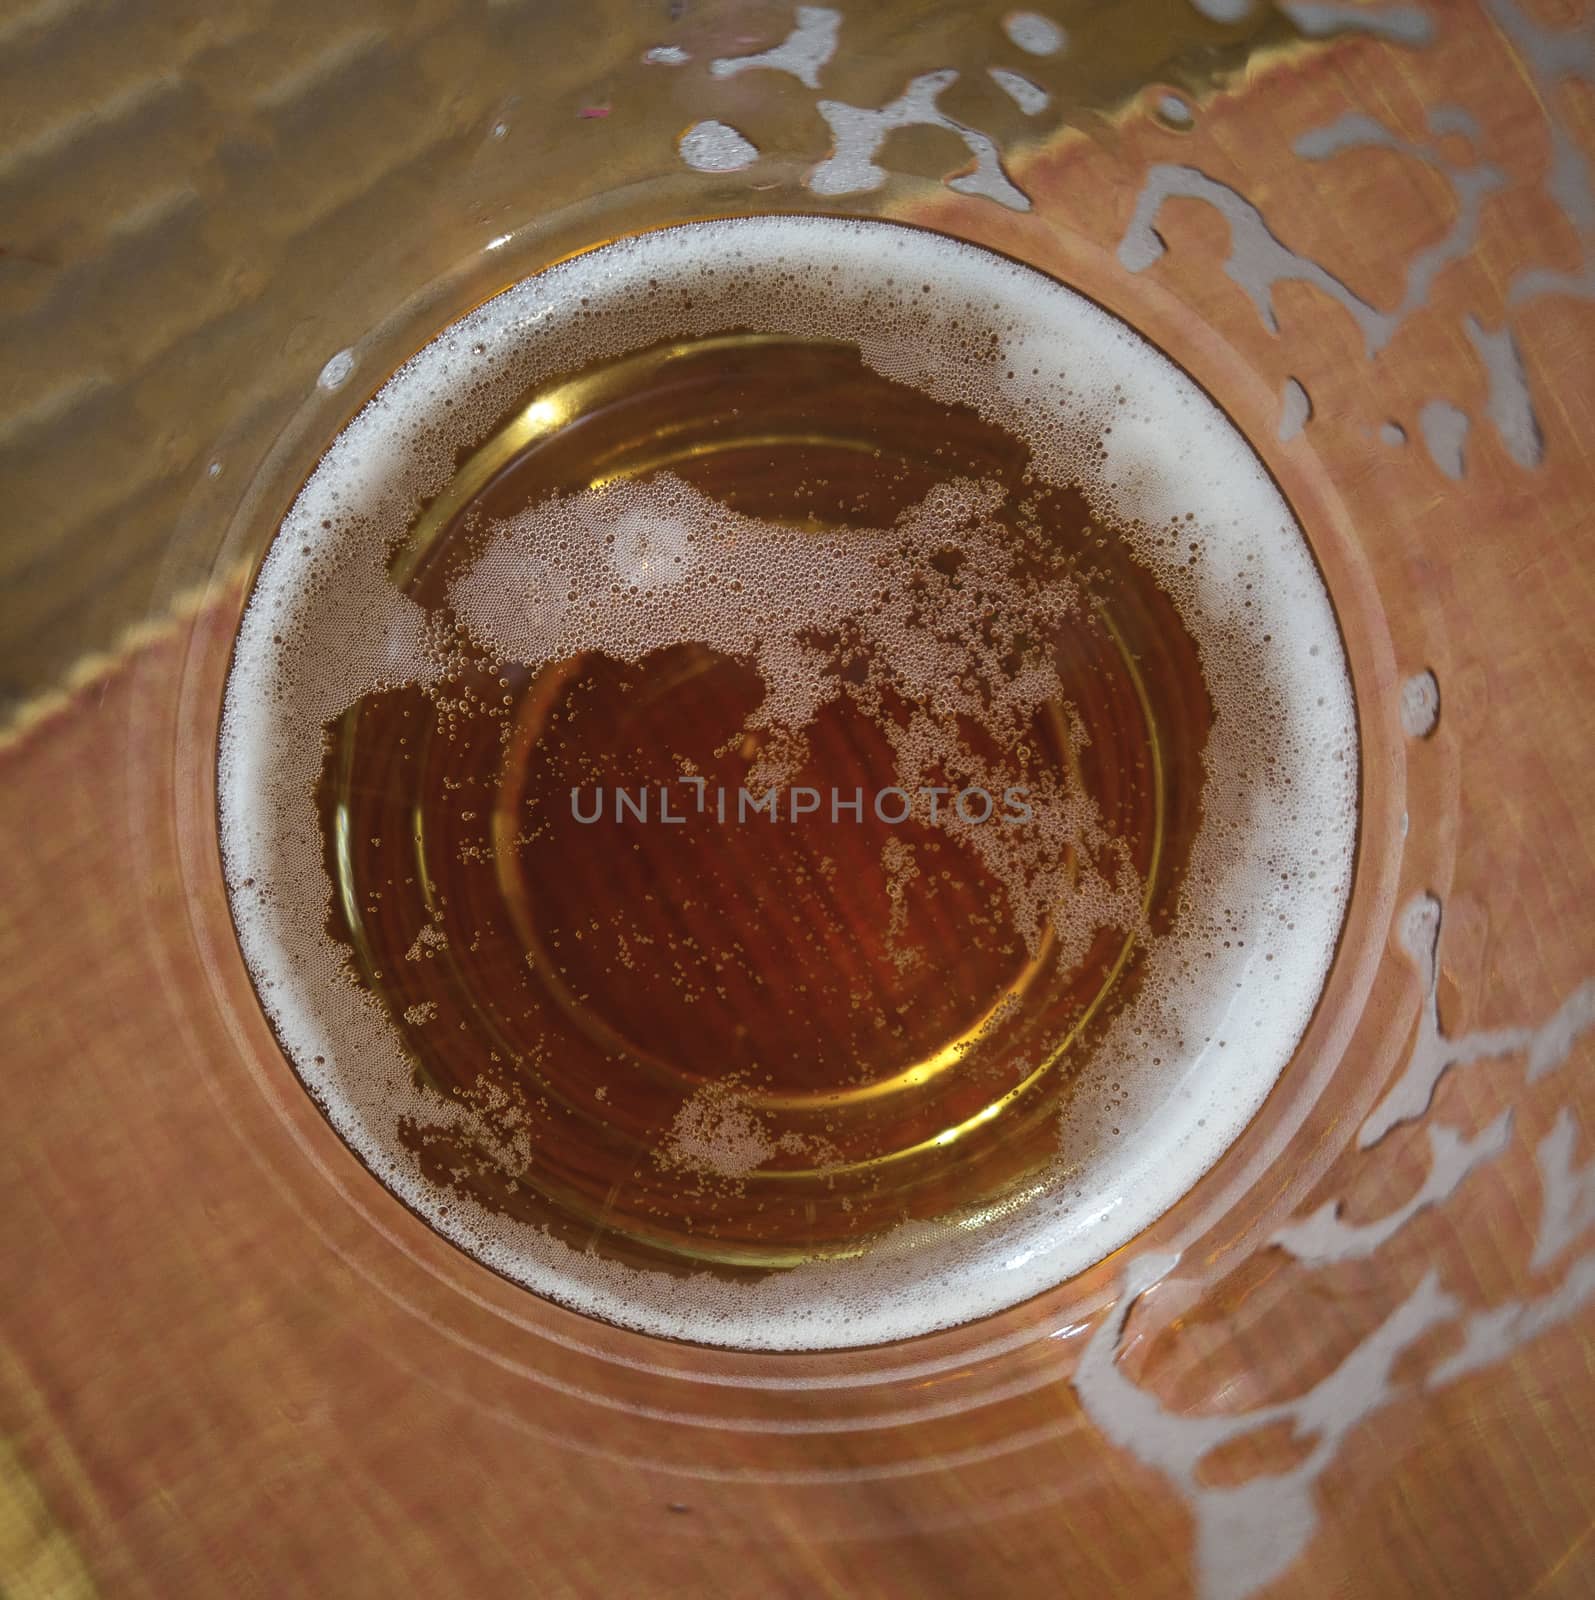 Inside of a glass of beer. by pippocarlot